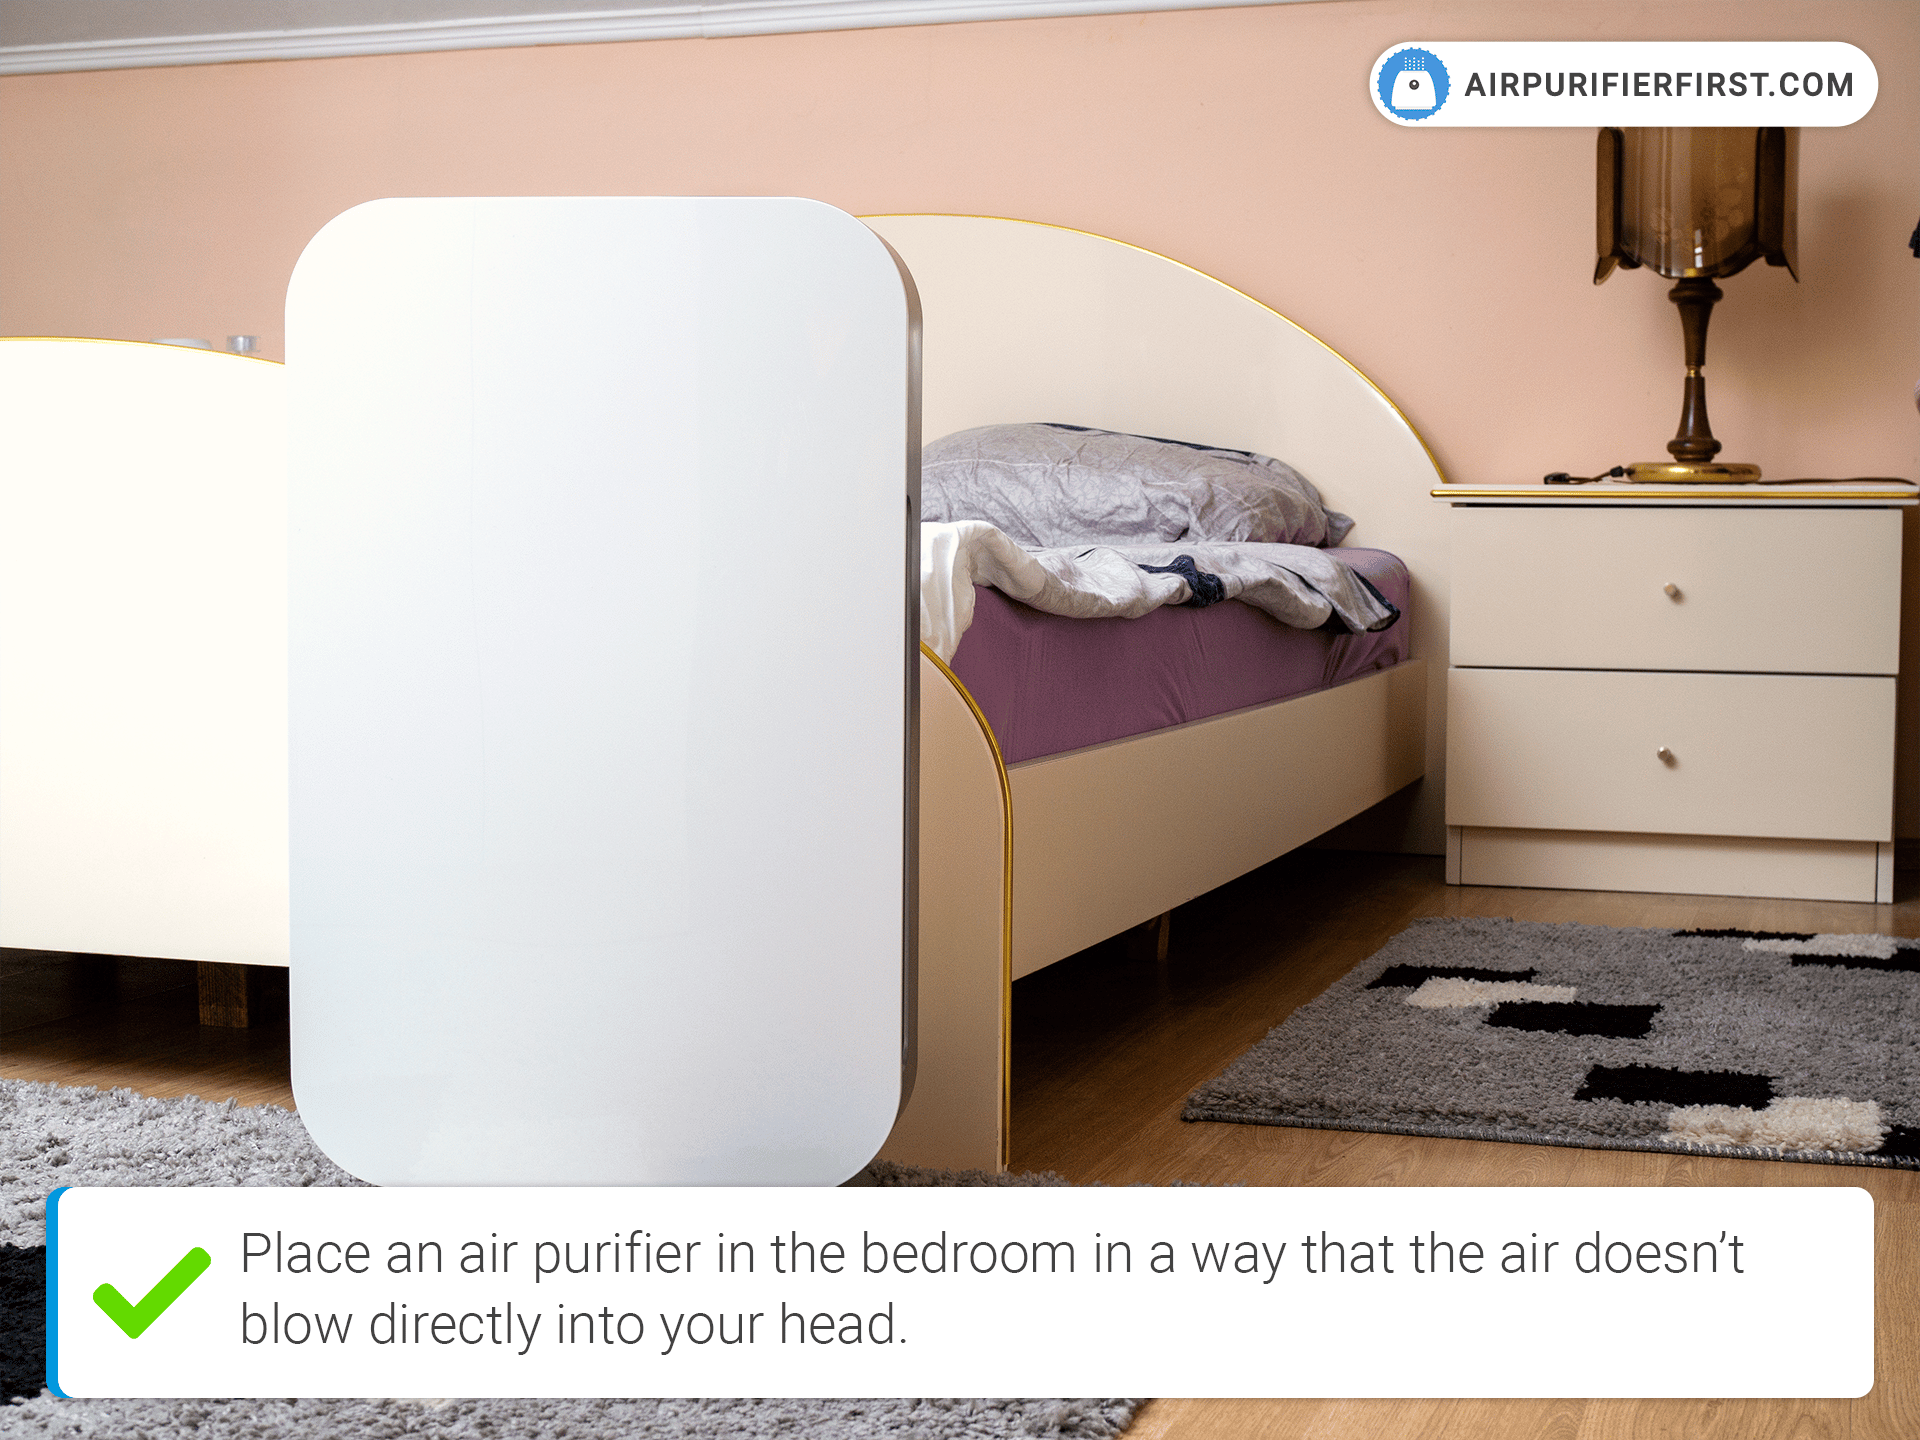 It is important to place an air purifier properly in a bedroom